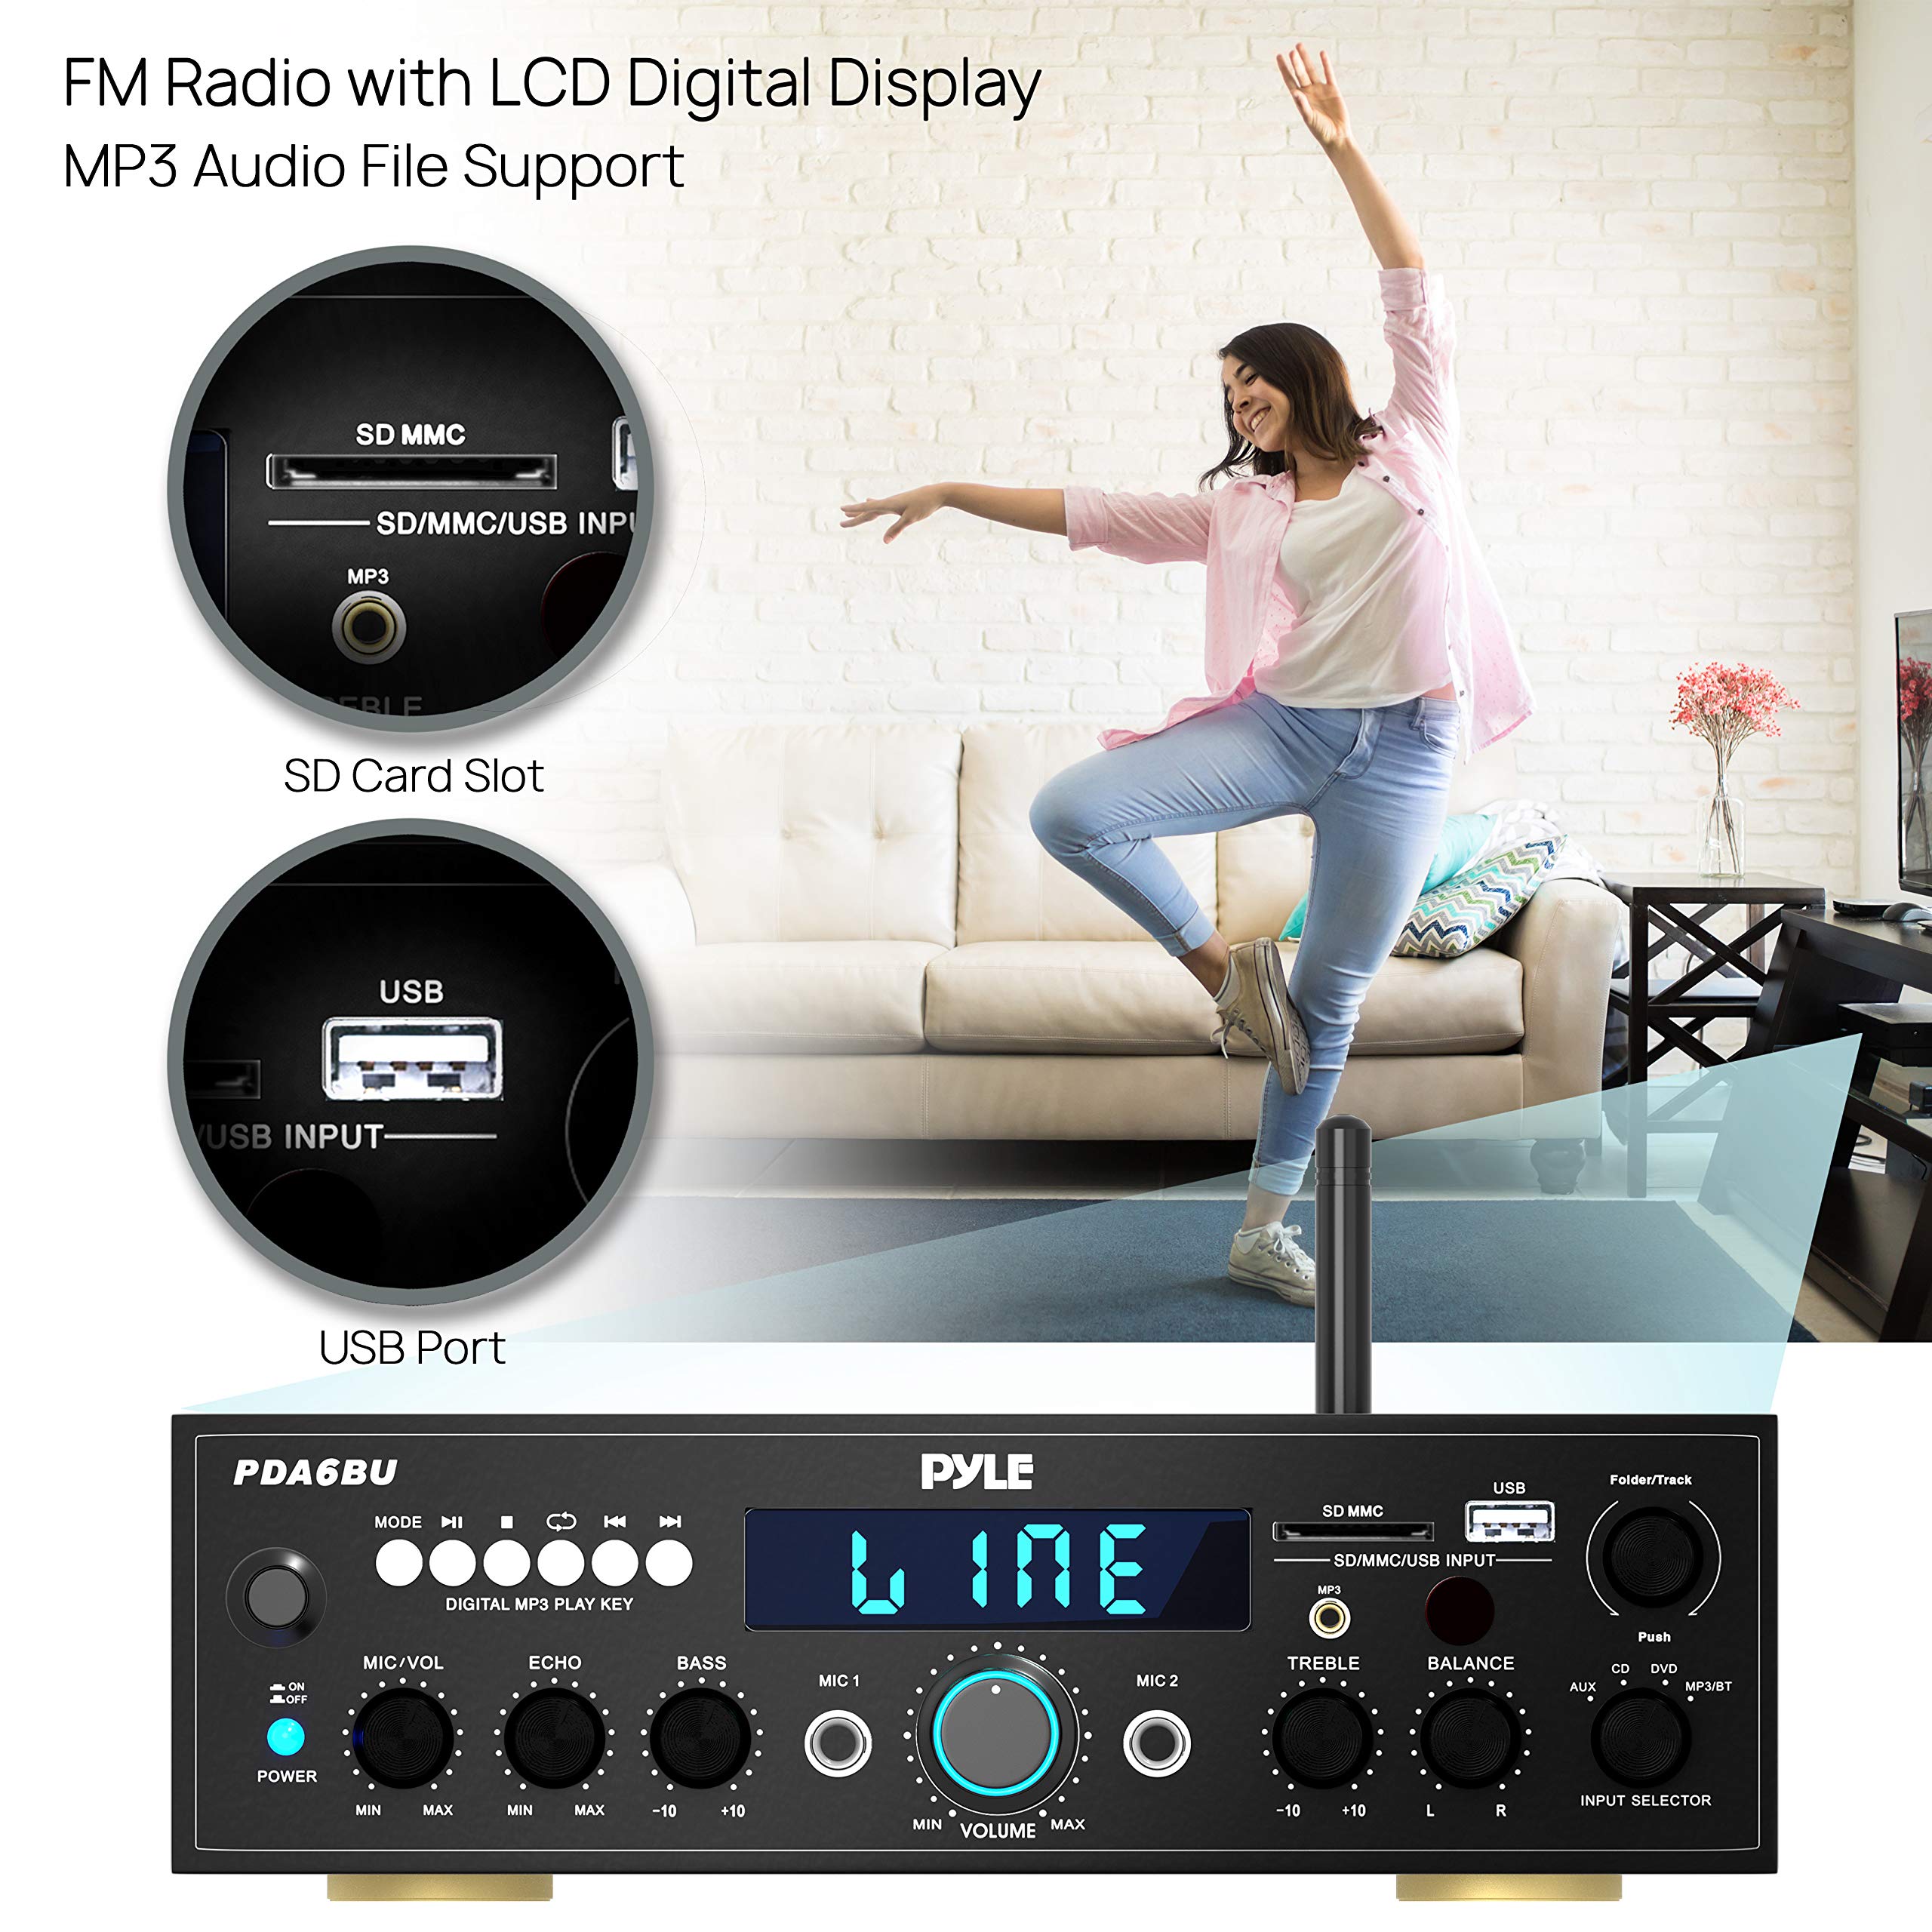 Pyle PDA6BU.6 - Wireless Bluetooth Power Amplifier System - 200W Dual Channel Sound Audio Stereo Receiver w/ USB, SD, AUX, MIC w/ Echo, Radio, LCD - For Home Theater Entertainment via RCA, Studio Use